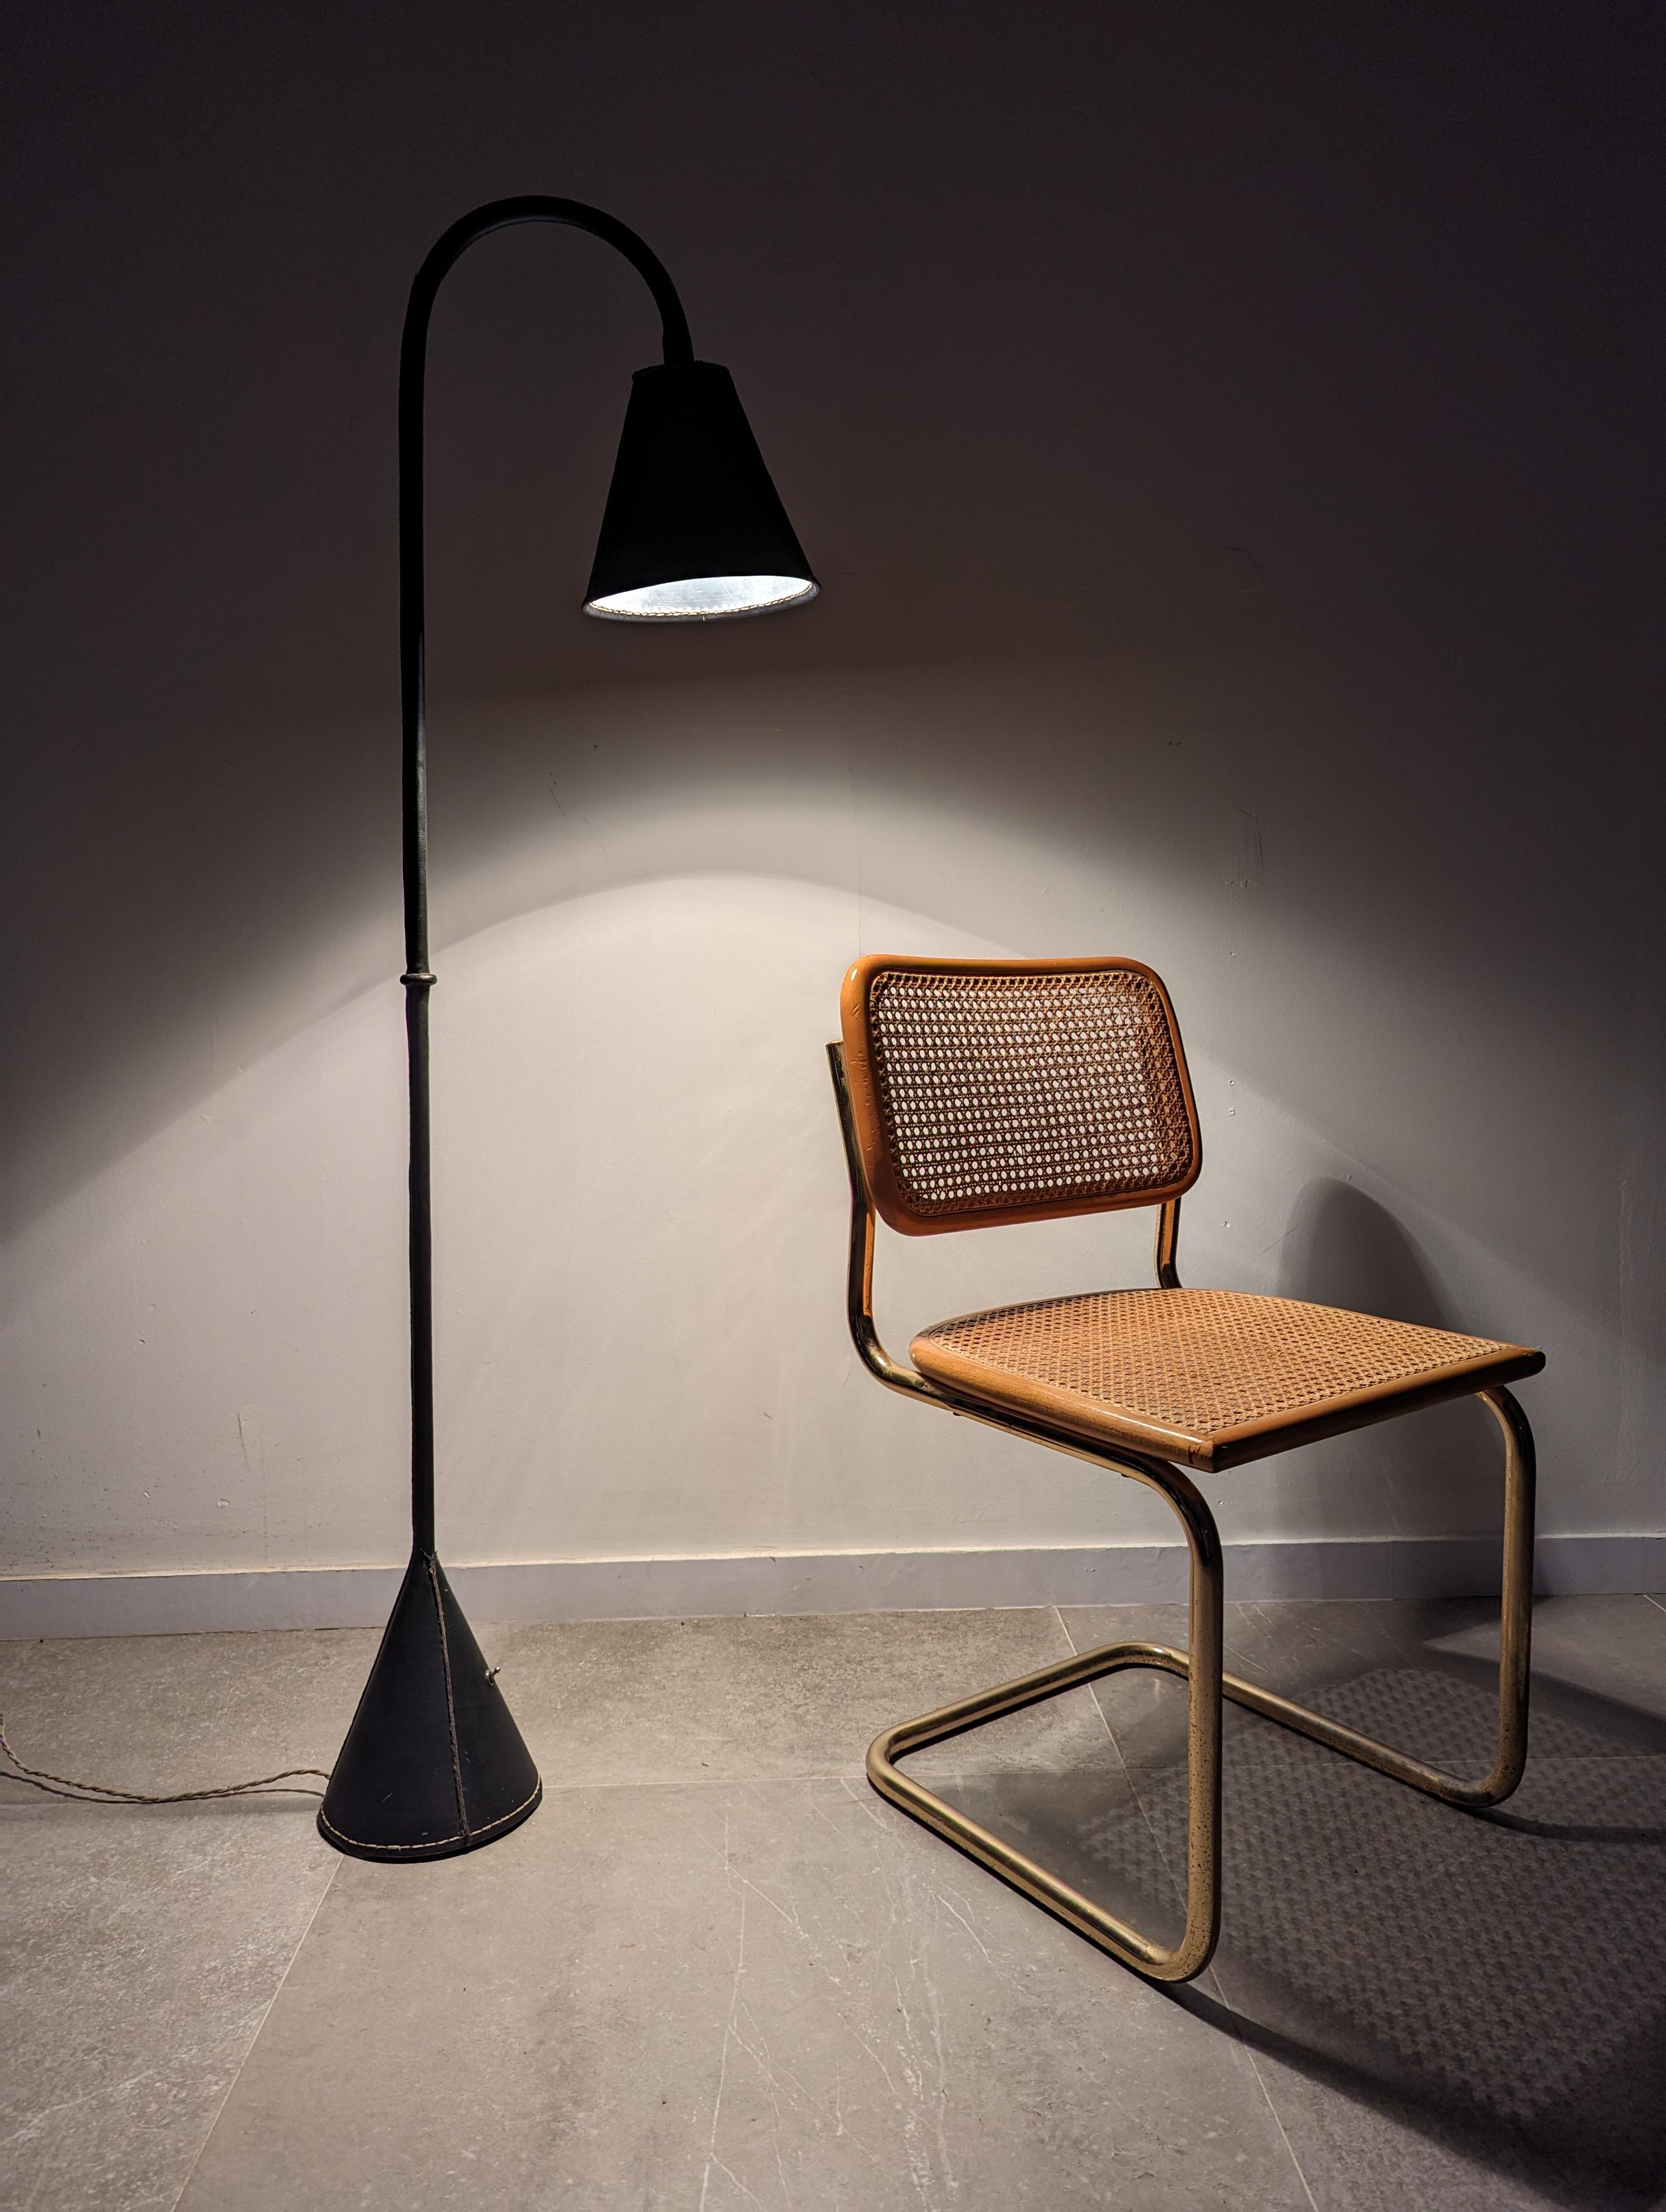 Fantastic floor lamp by the great French designer and architect Jacques Adnet made of black leather and sewn by hand.